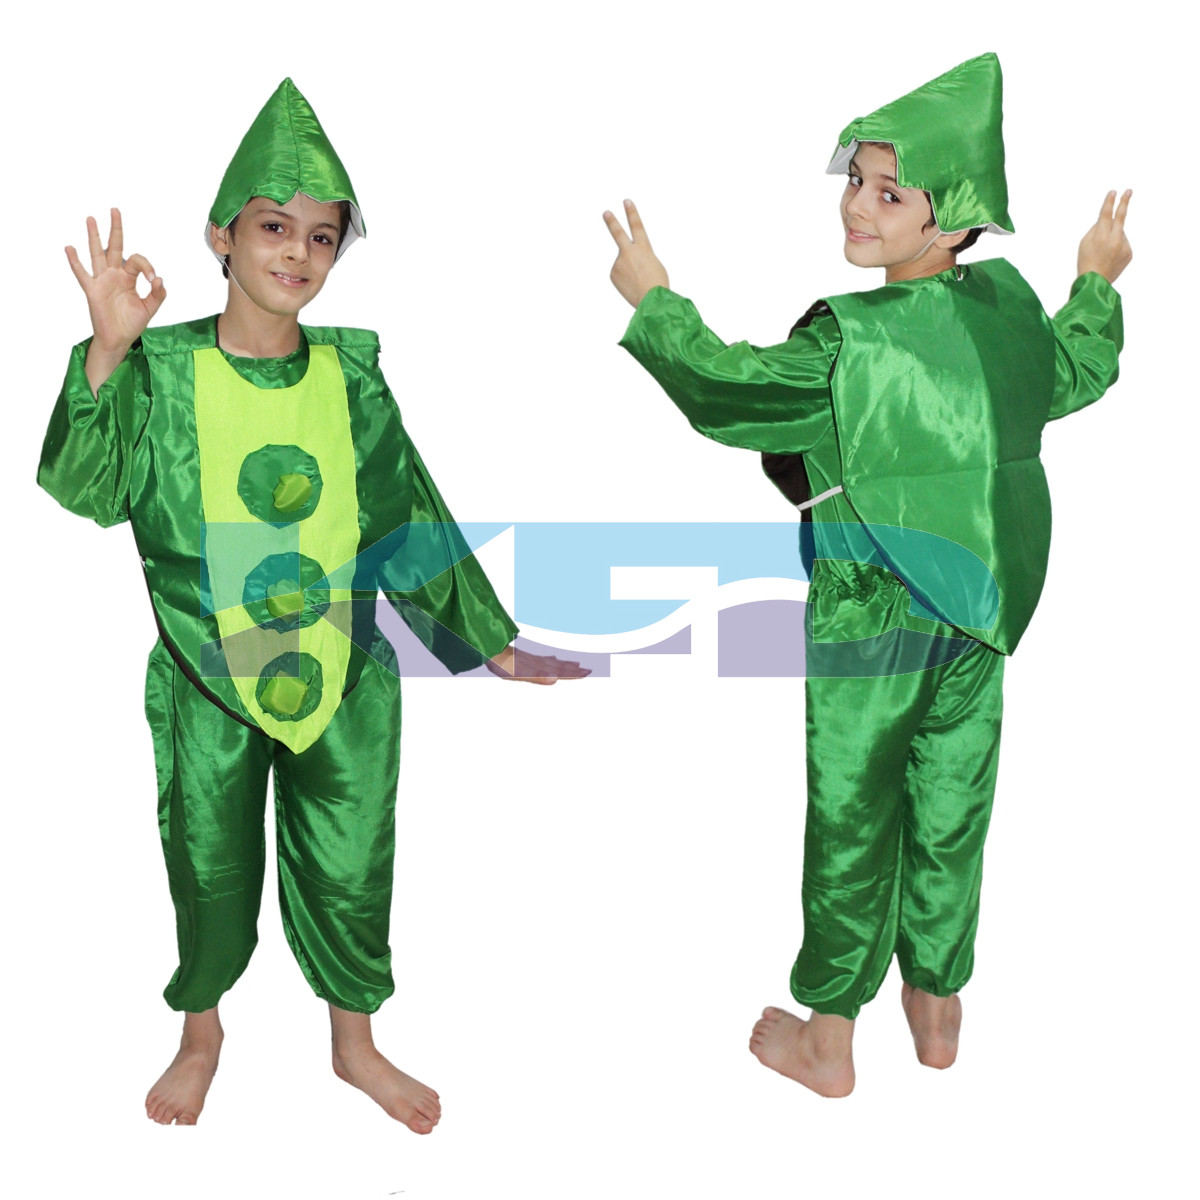 Peas fancy dress for kids,Vegetables Costume for School Annual function/Theme Party/Competition/Stage Shows Dress